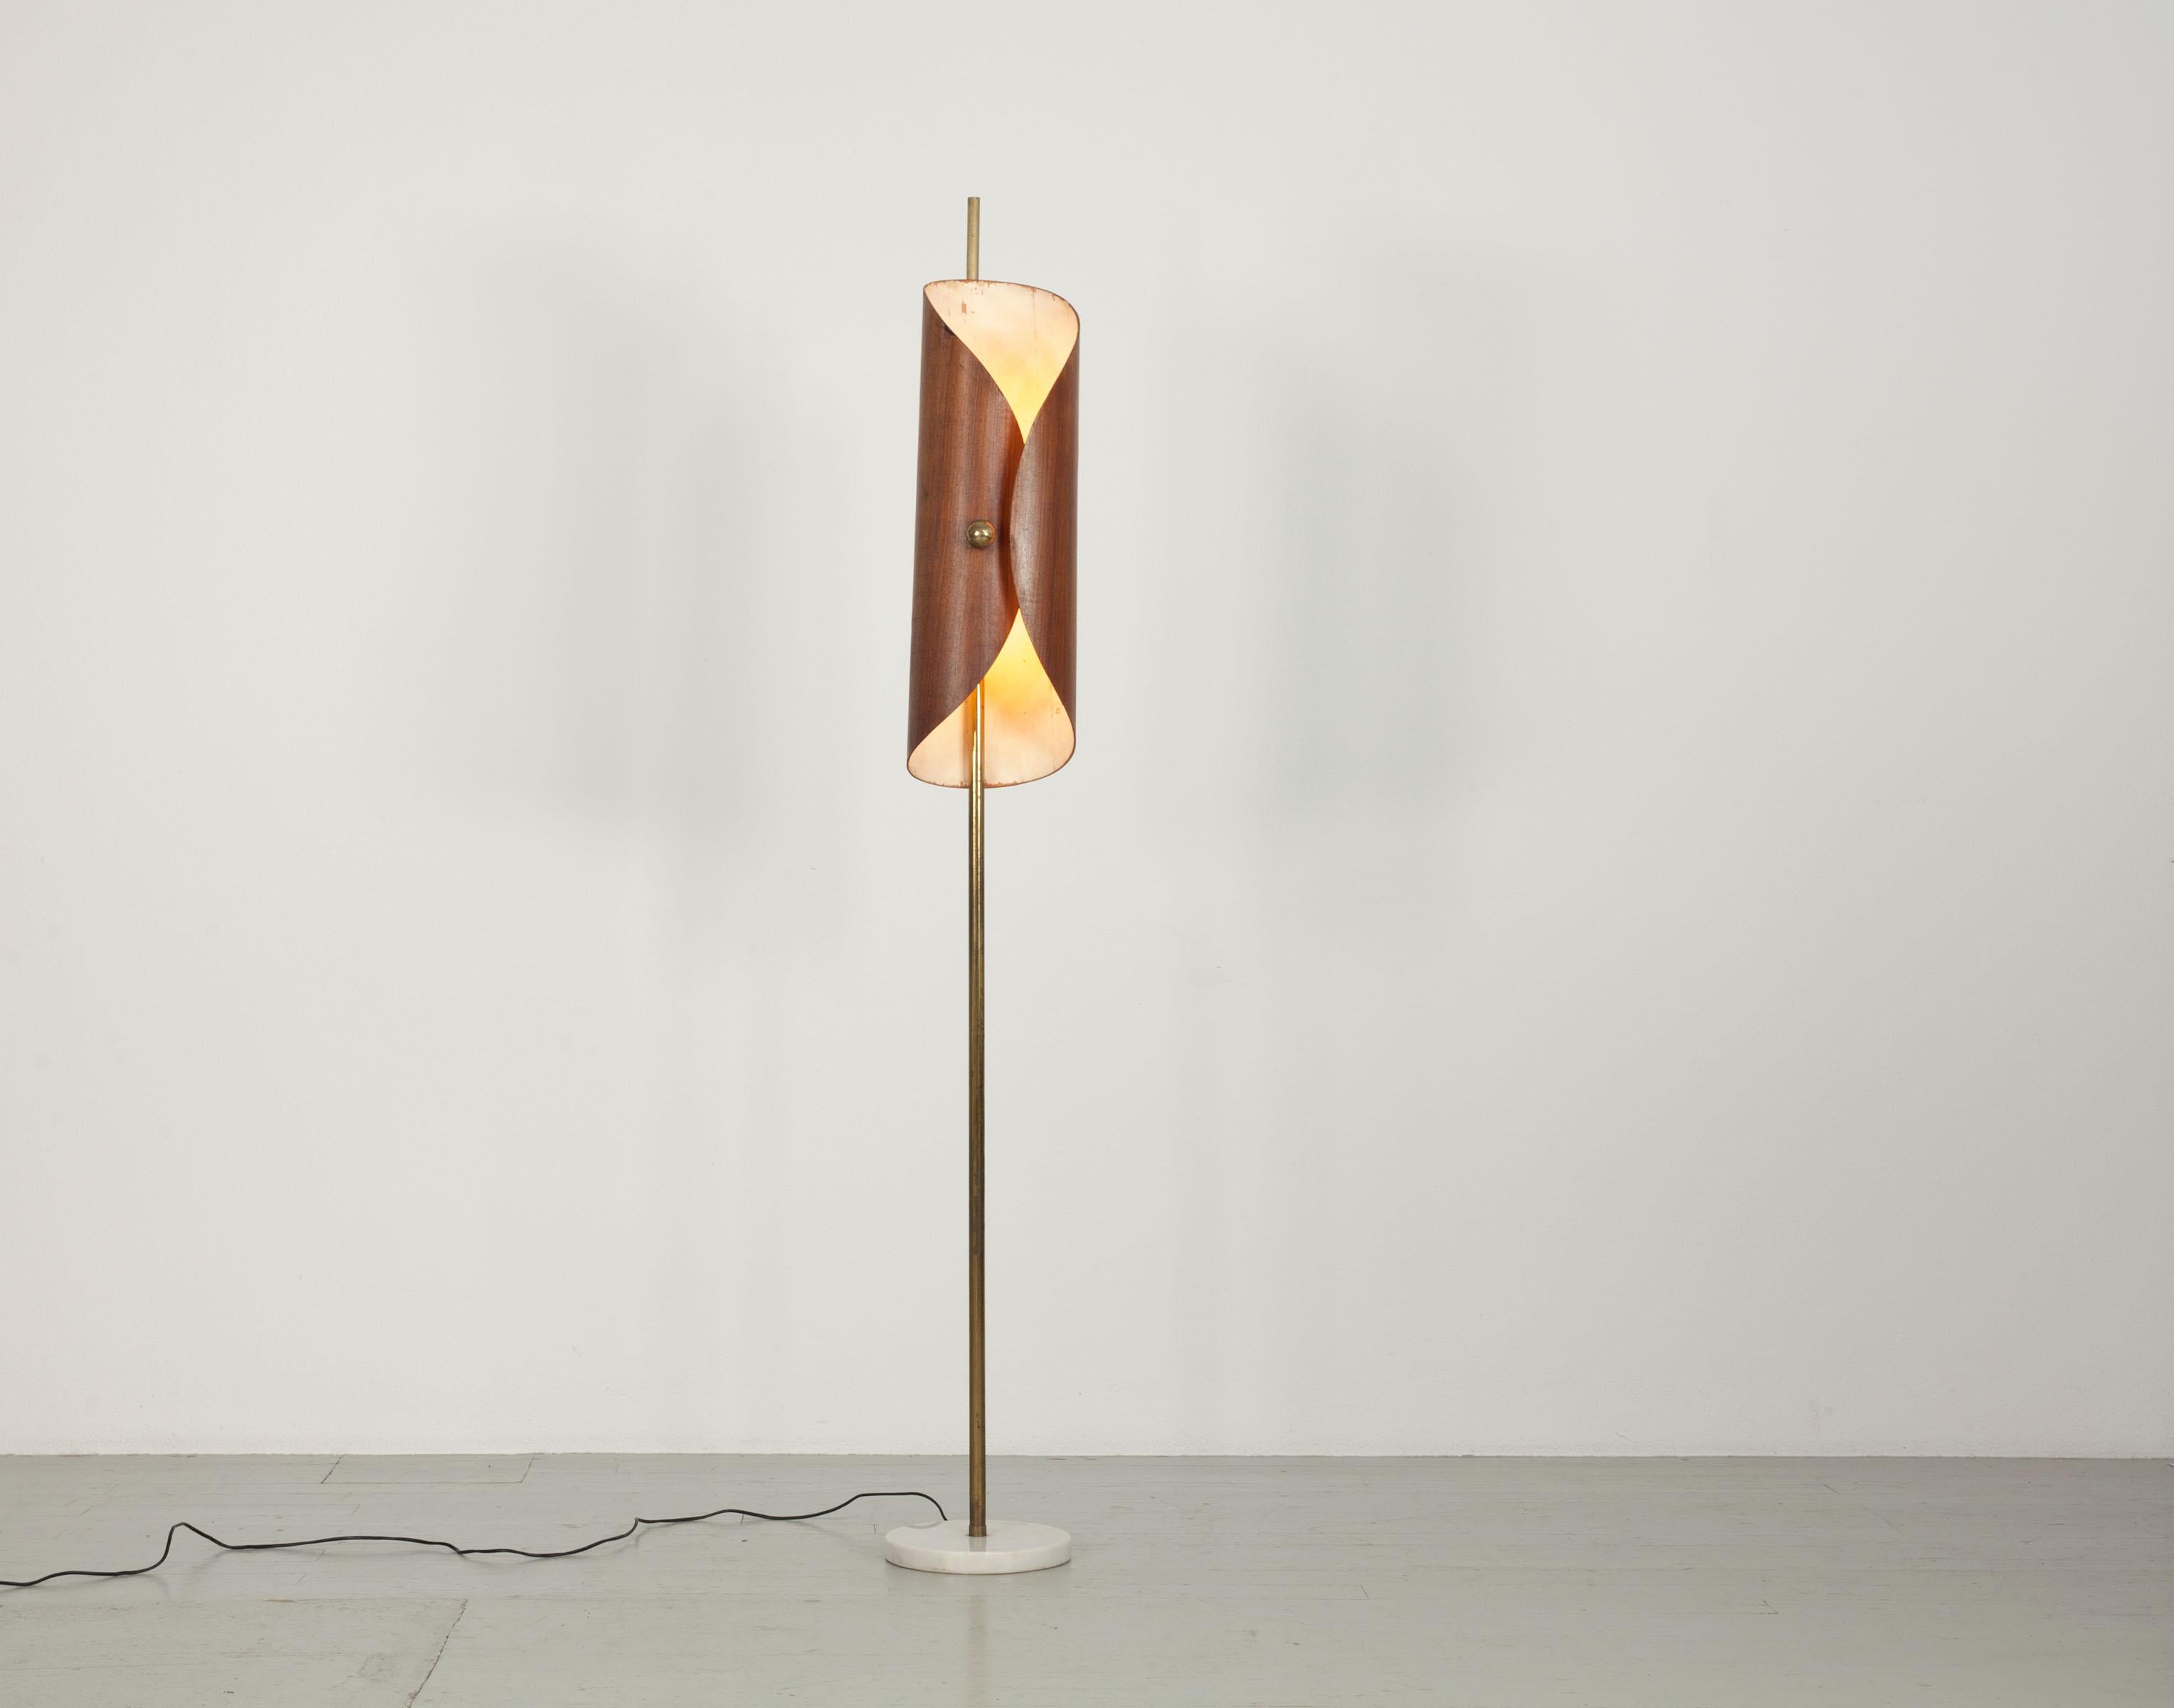 Italian floor lamp from the 60s. The lamp has a lampshade made of laminated wood with brass elements and a rod made of brass. The base of the lamp is made of marble. It has an E27 socket. Except for age-related patina, the lamp is in good